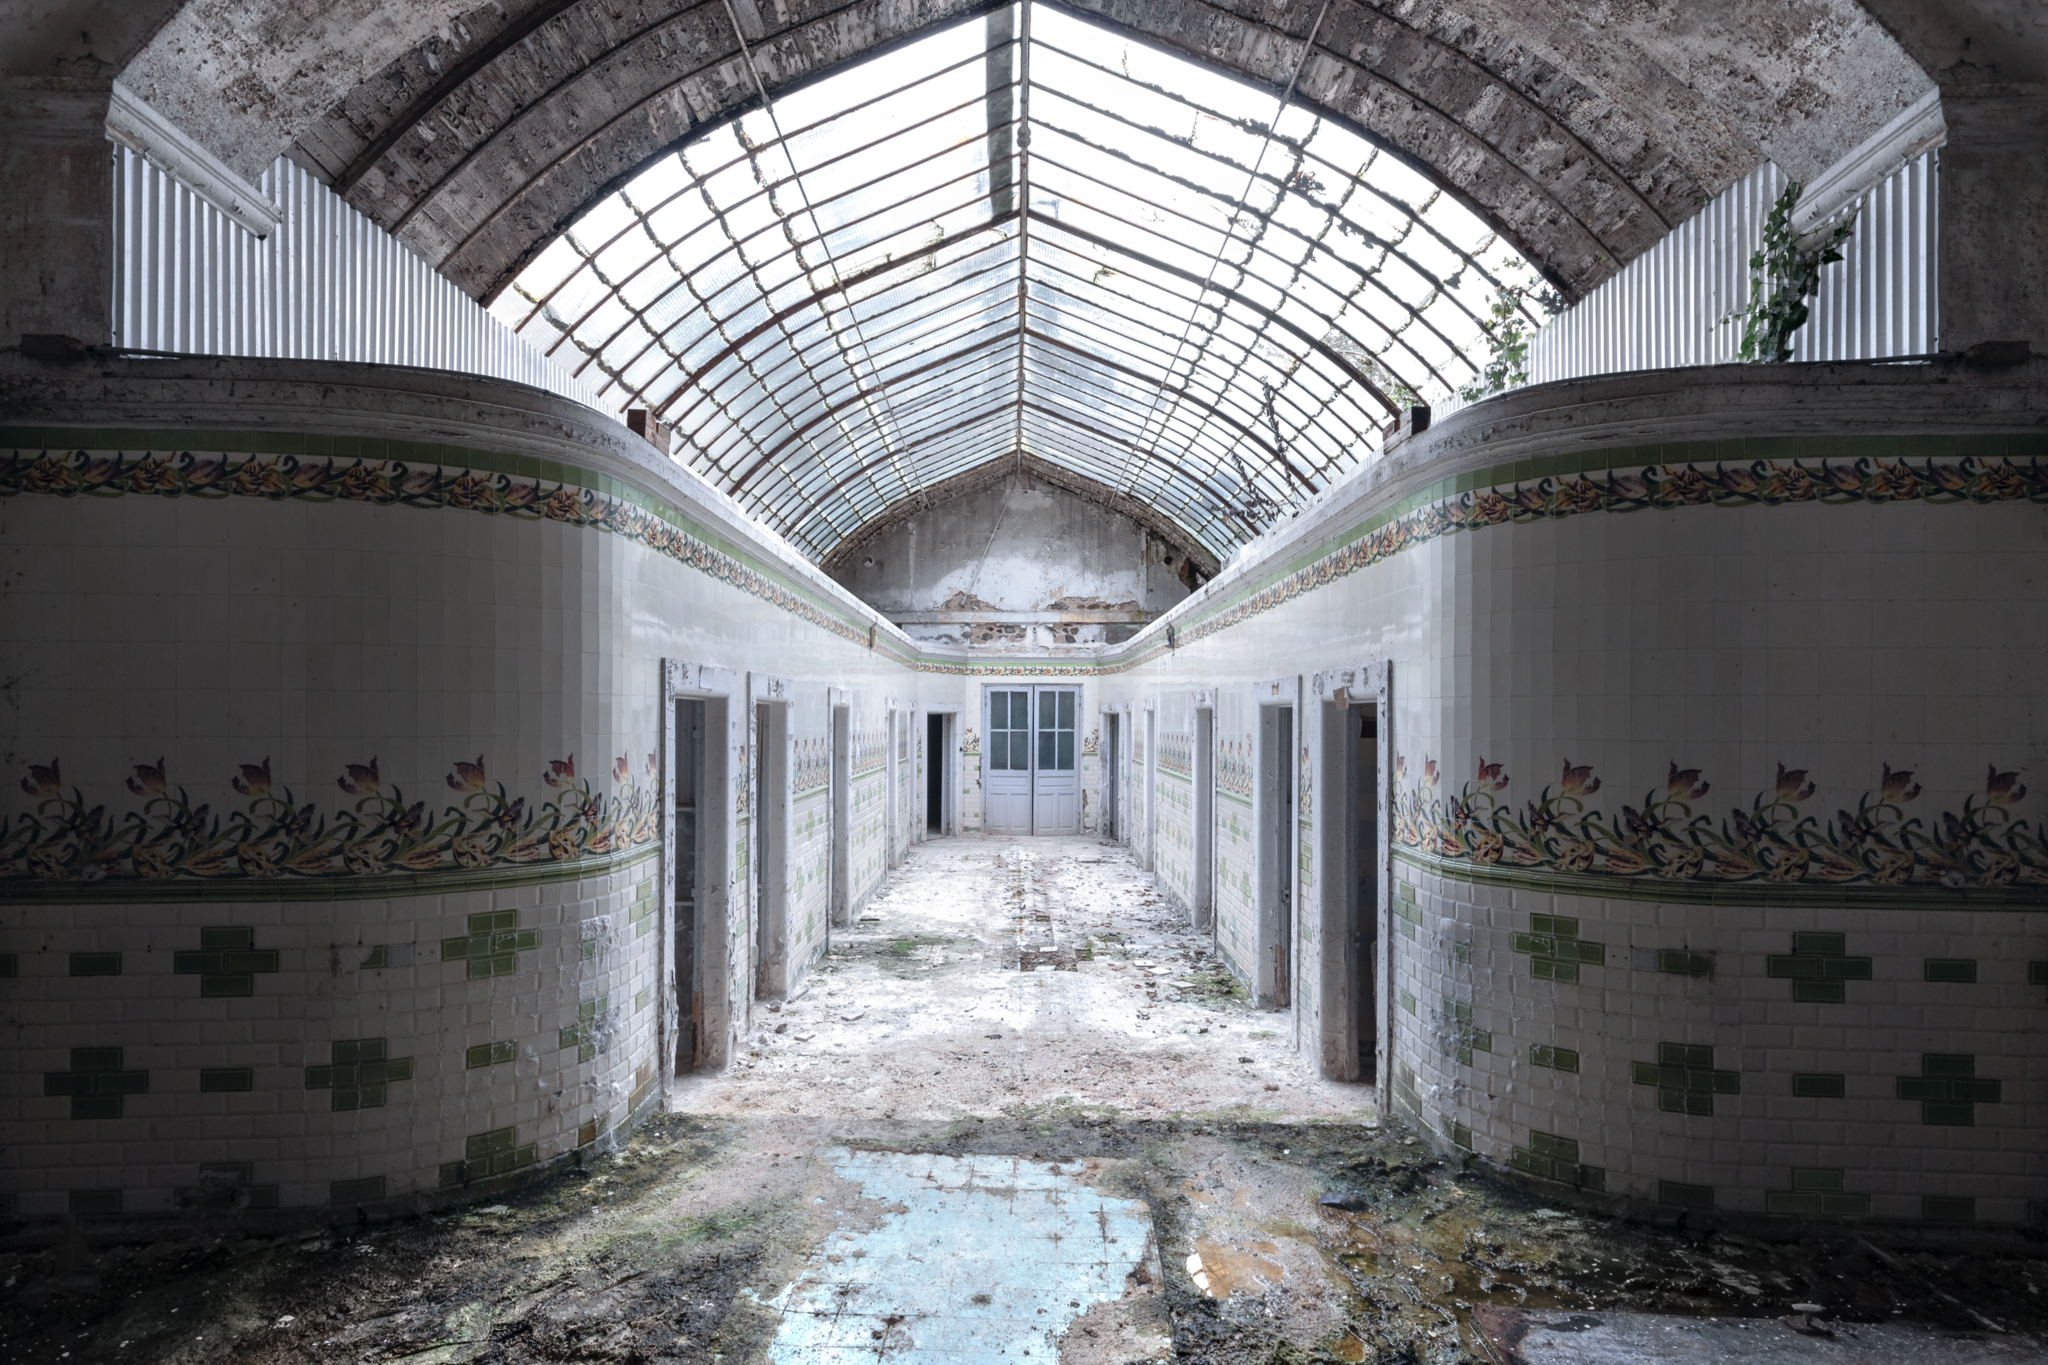 Abandoned thermal baths in France